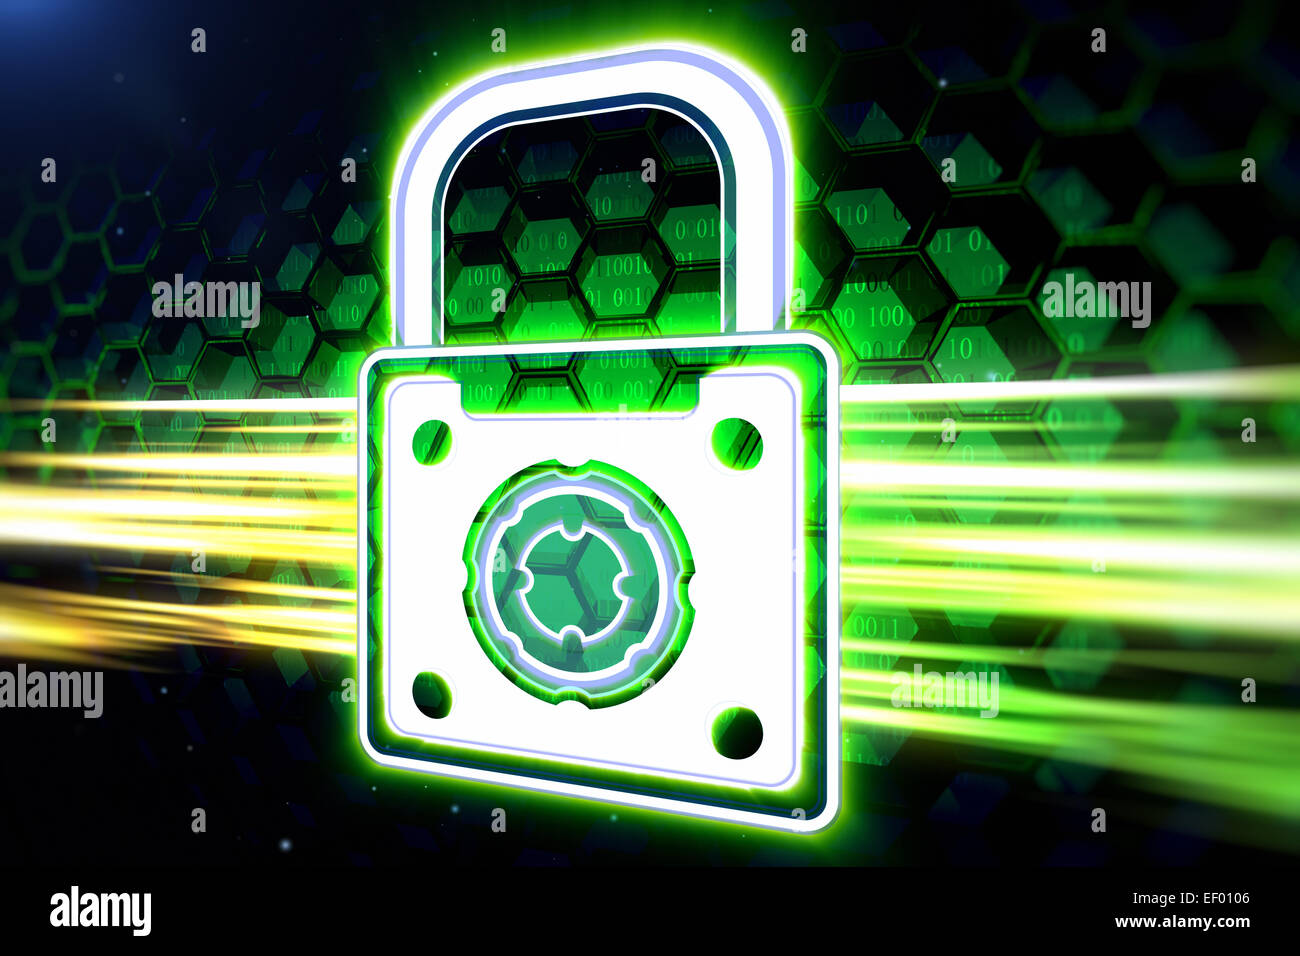 Padlock as a symbol of information safety Stock Photo